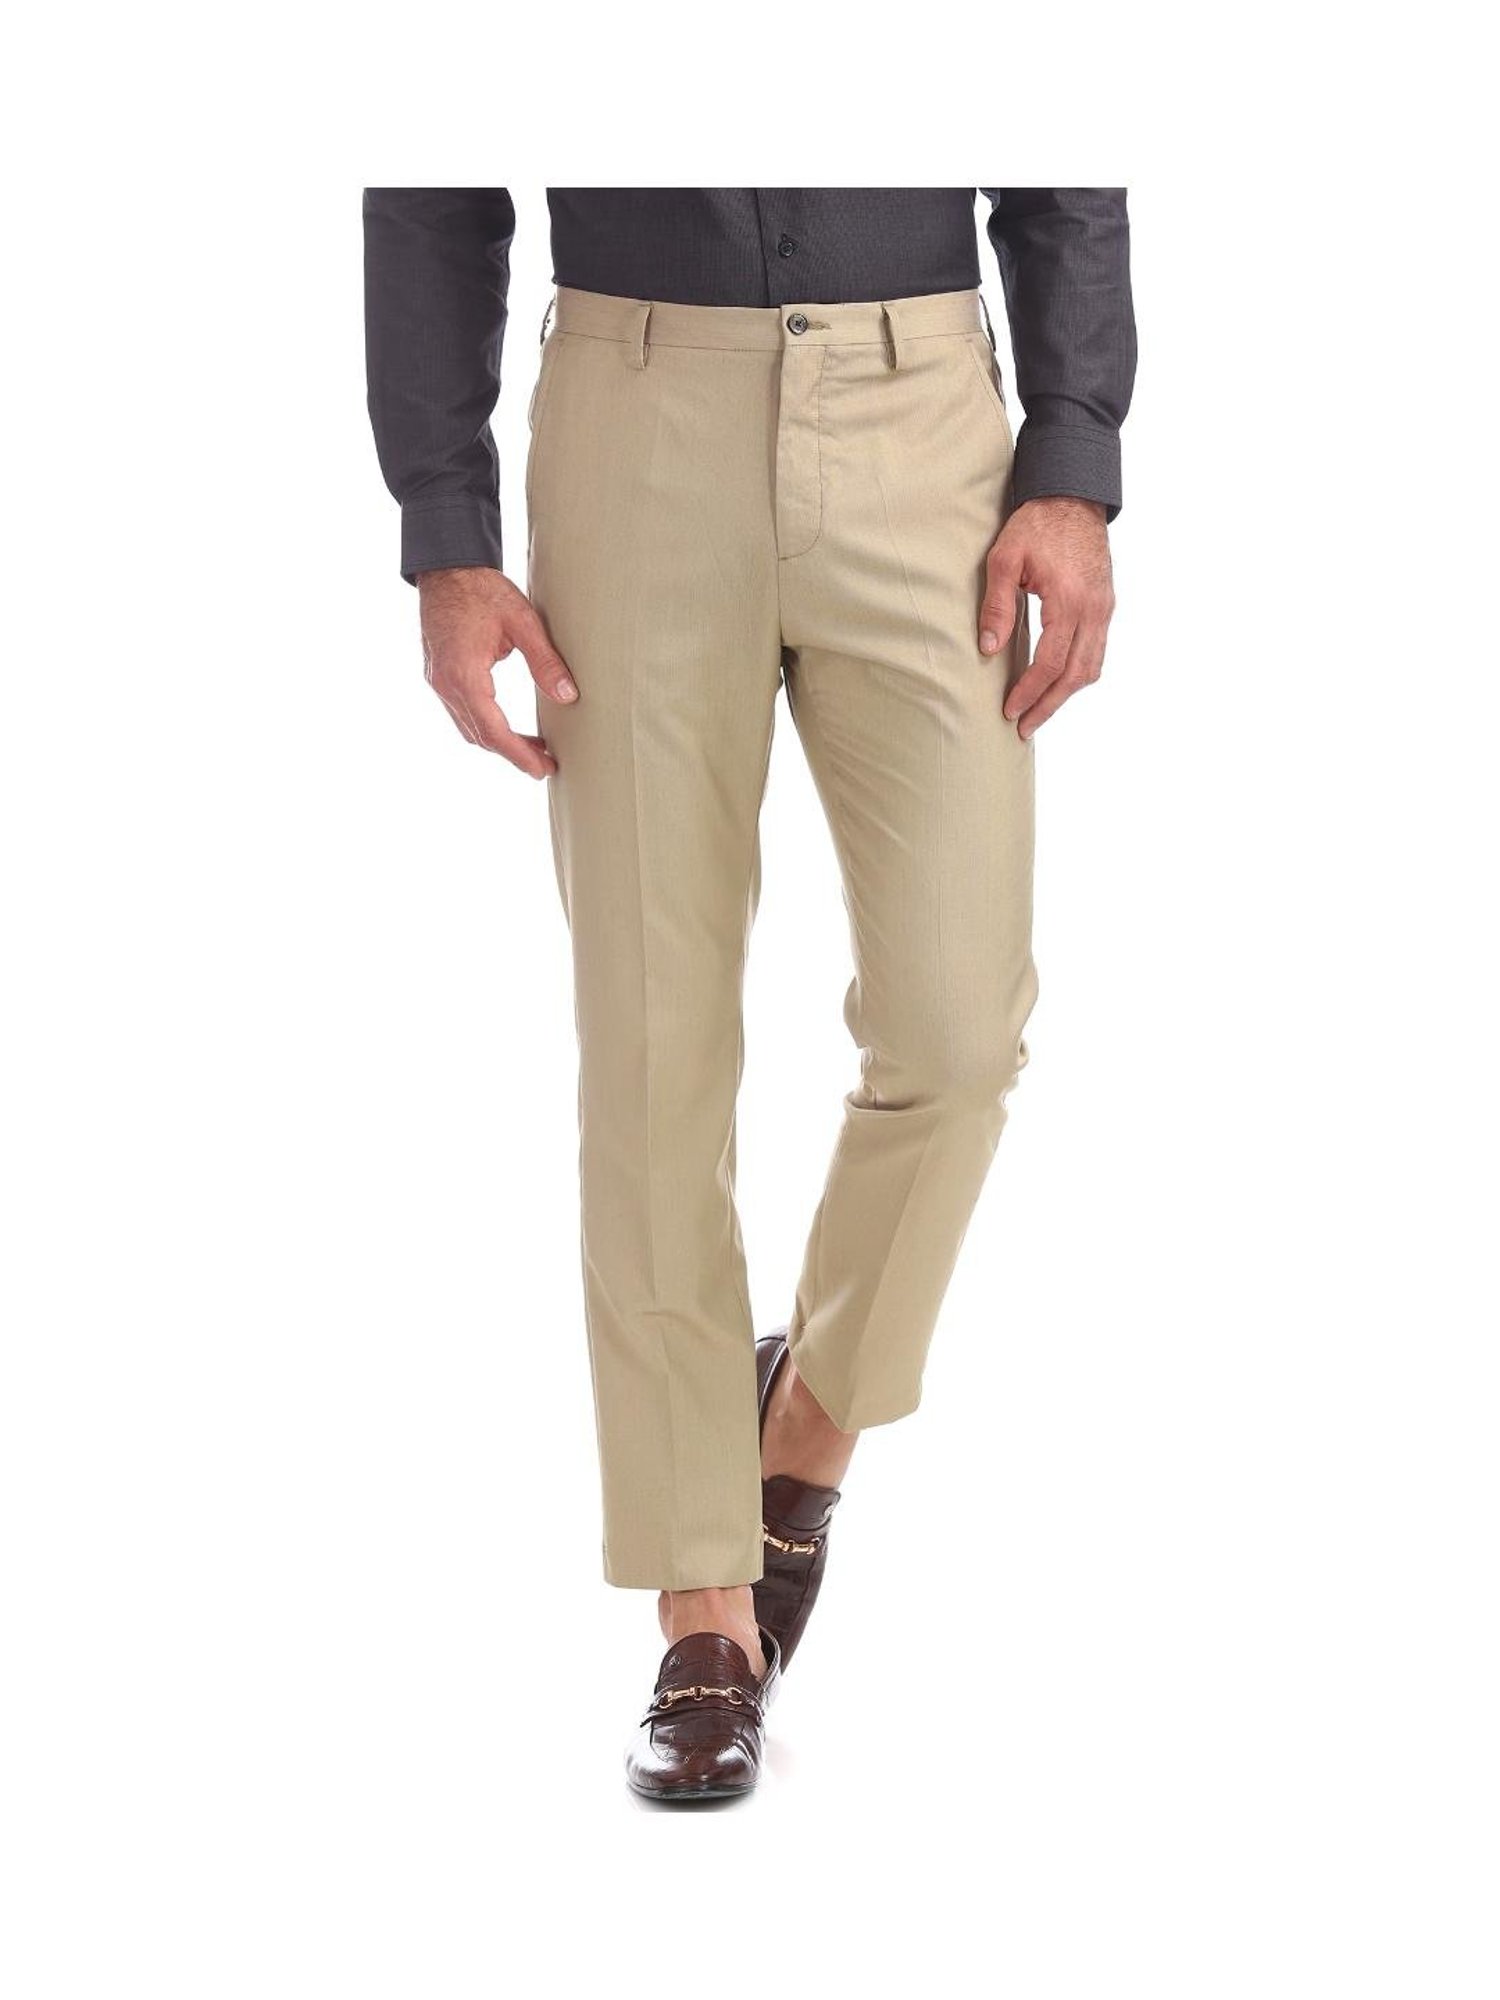 Arrow Tapered Fit Patterned Mid Waist Mens Formal Trouser Charcoal  M8HOEK3IB4Q in Chennai at best price by Attitude  Justdial